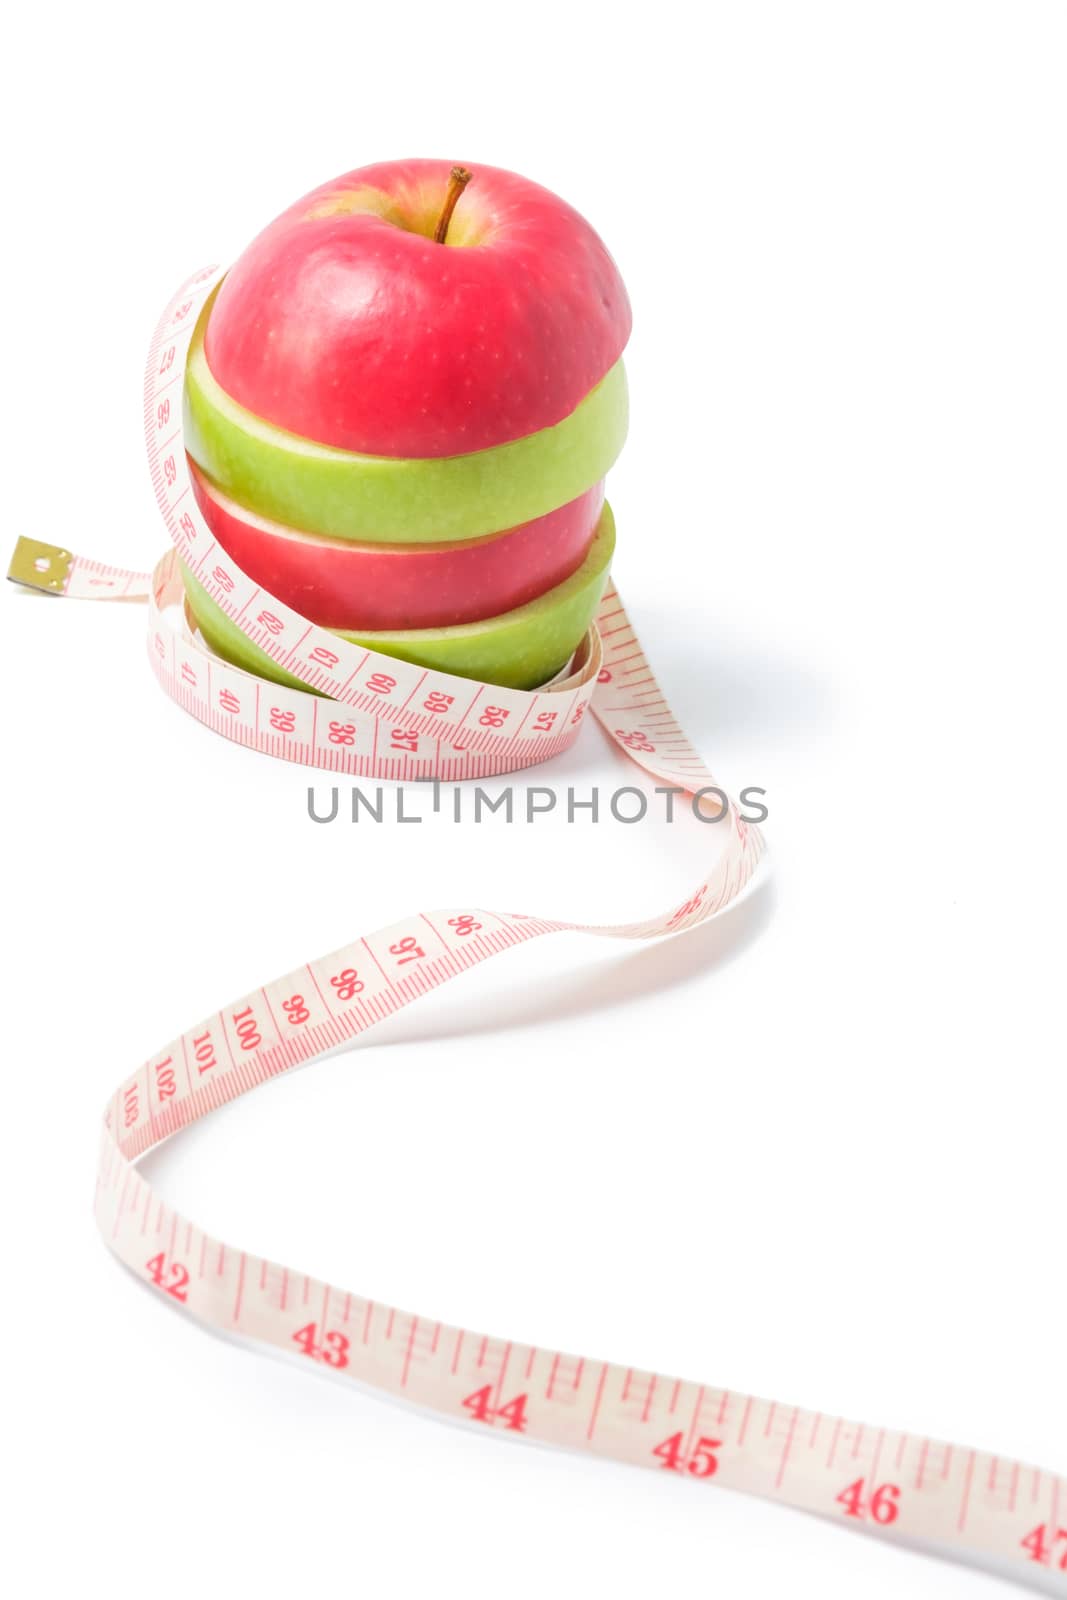 slice red and green apples with waist measure on white background
